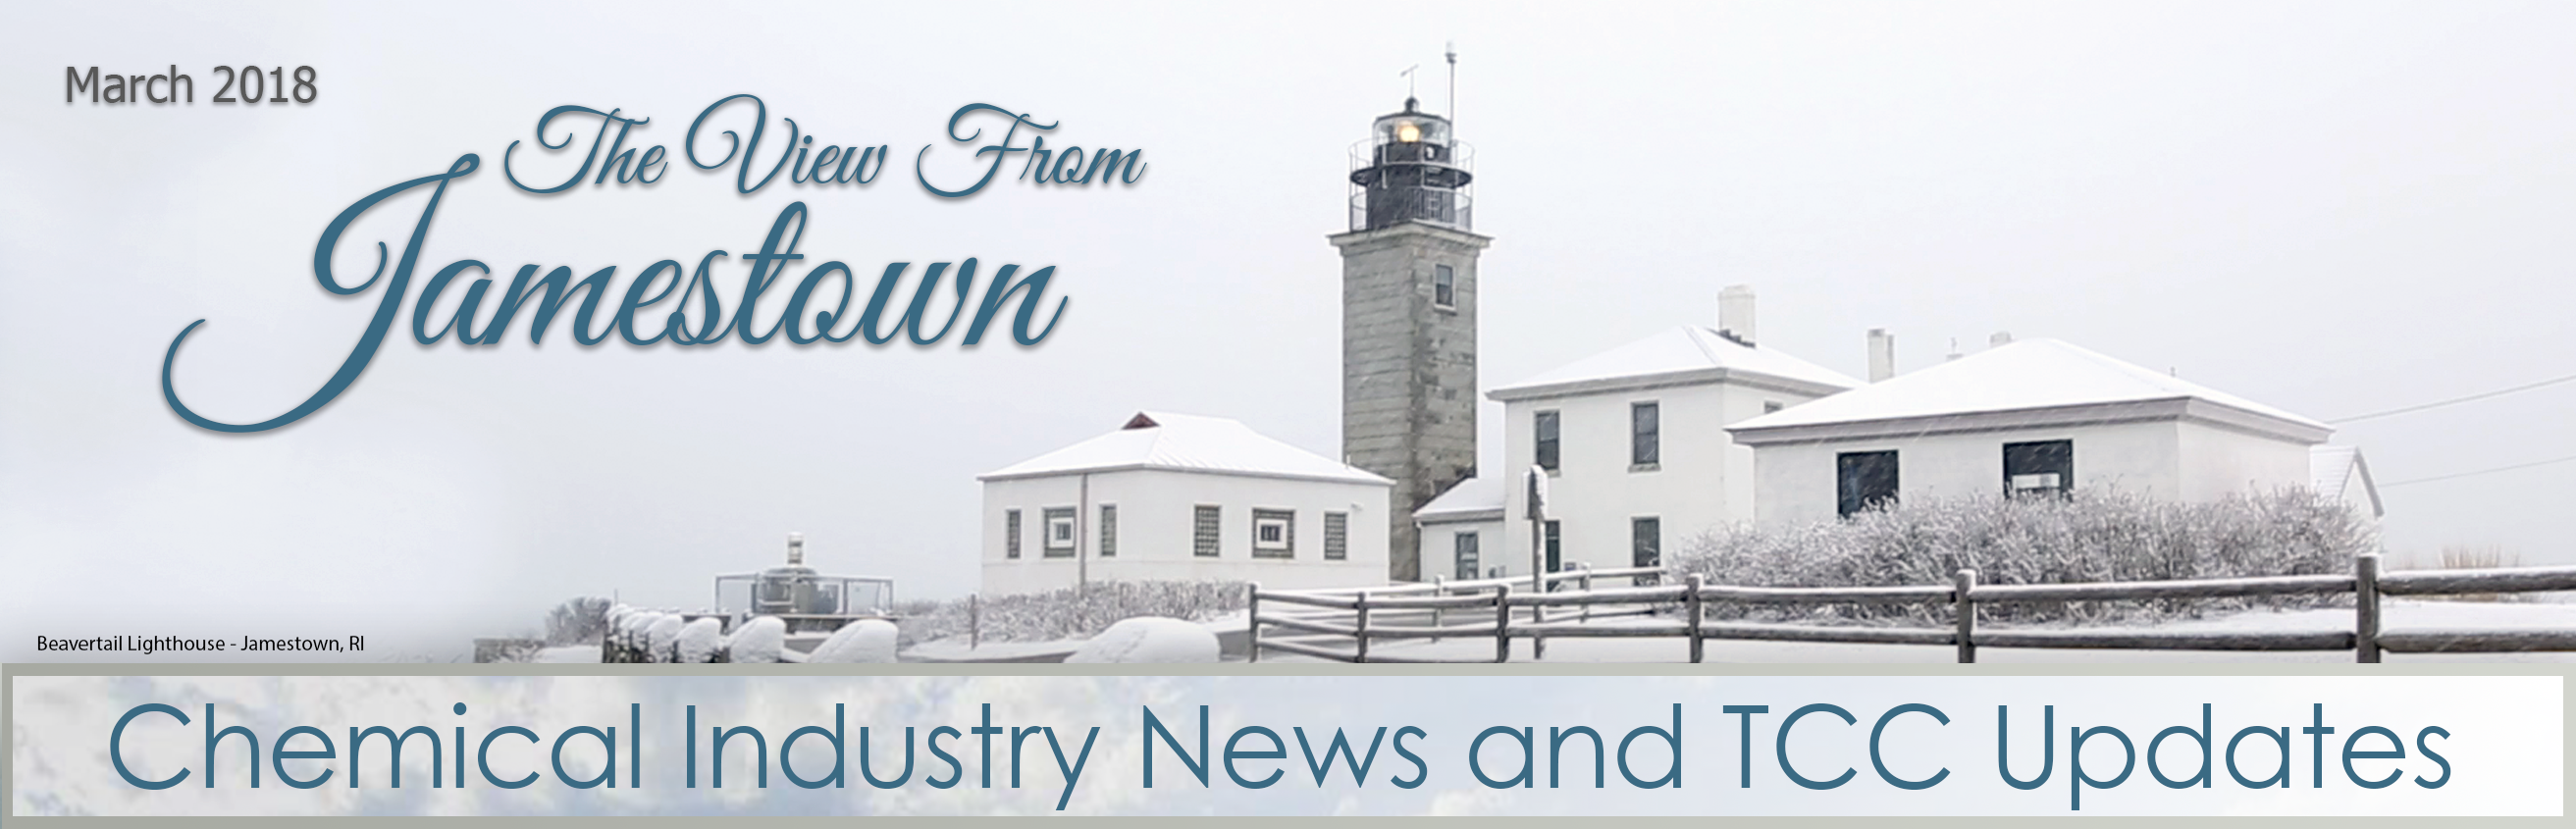 The View from Jamestown March 2018 - The Chemical Company | Chemical Distributor